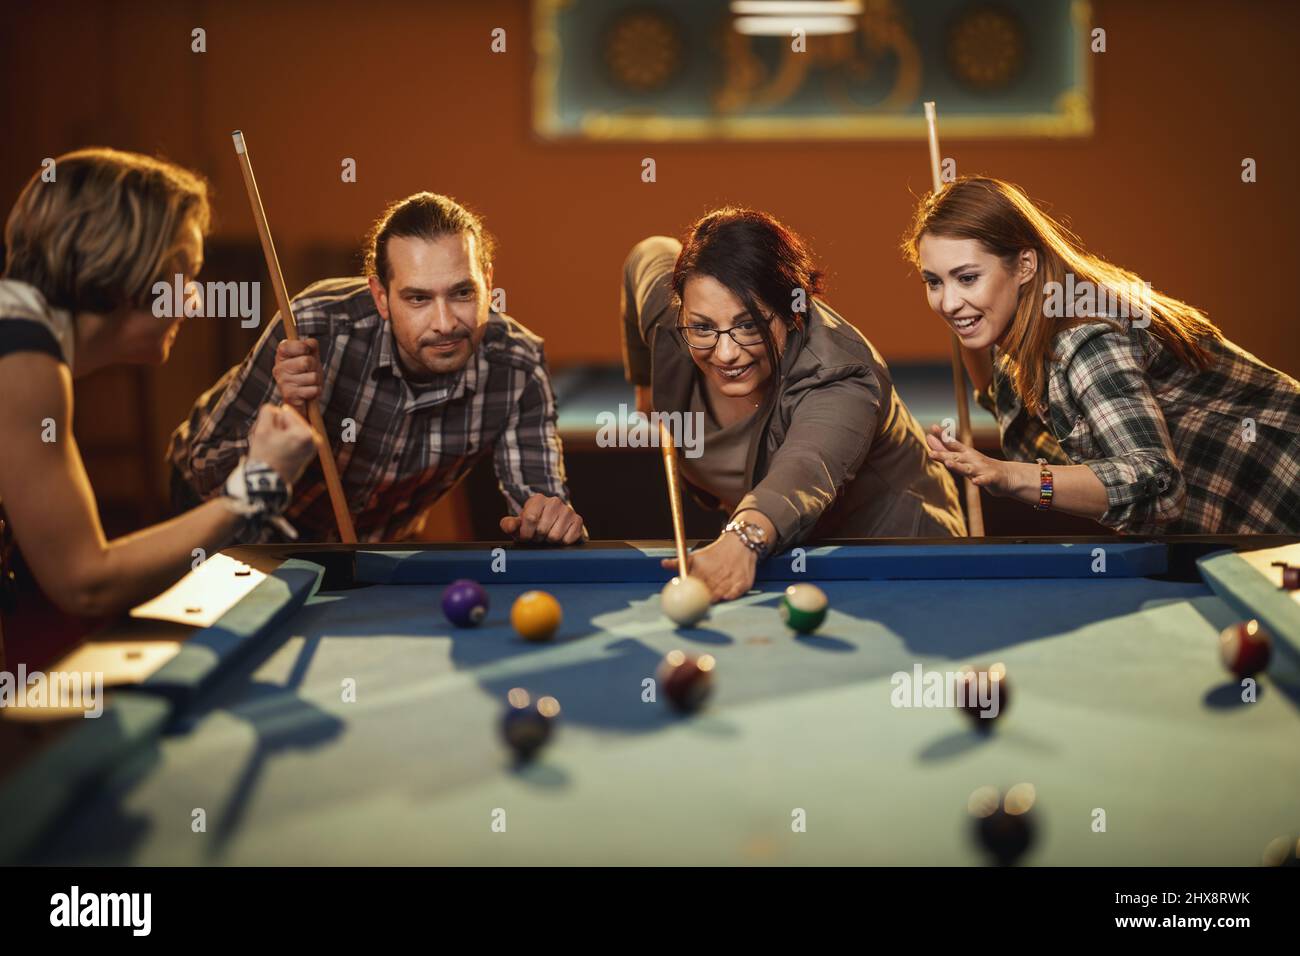 Young smiling cheerful friends are playing billiards in bar after work. They are involved in recreational activity. Stock Photo